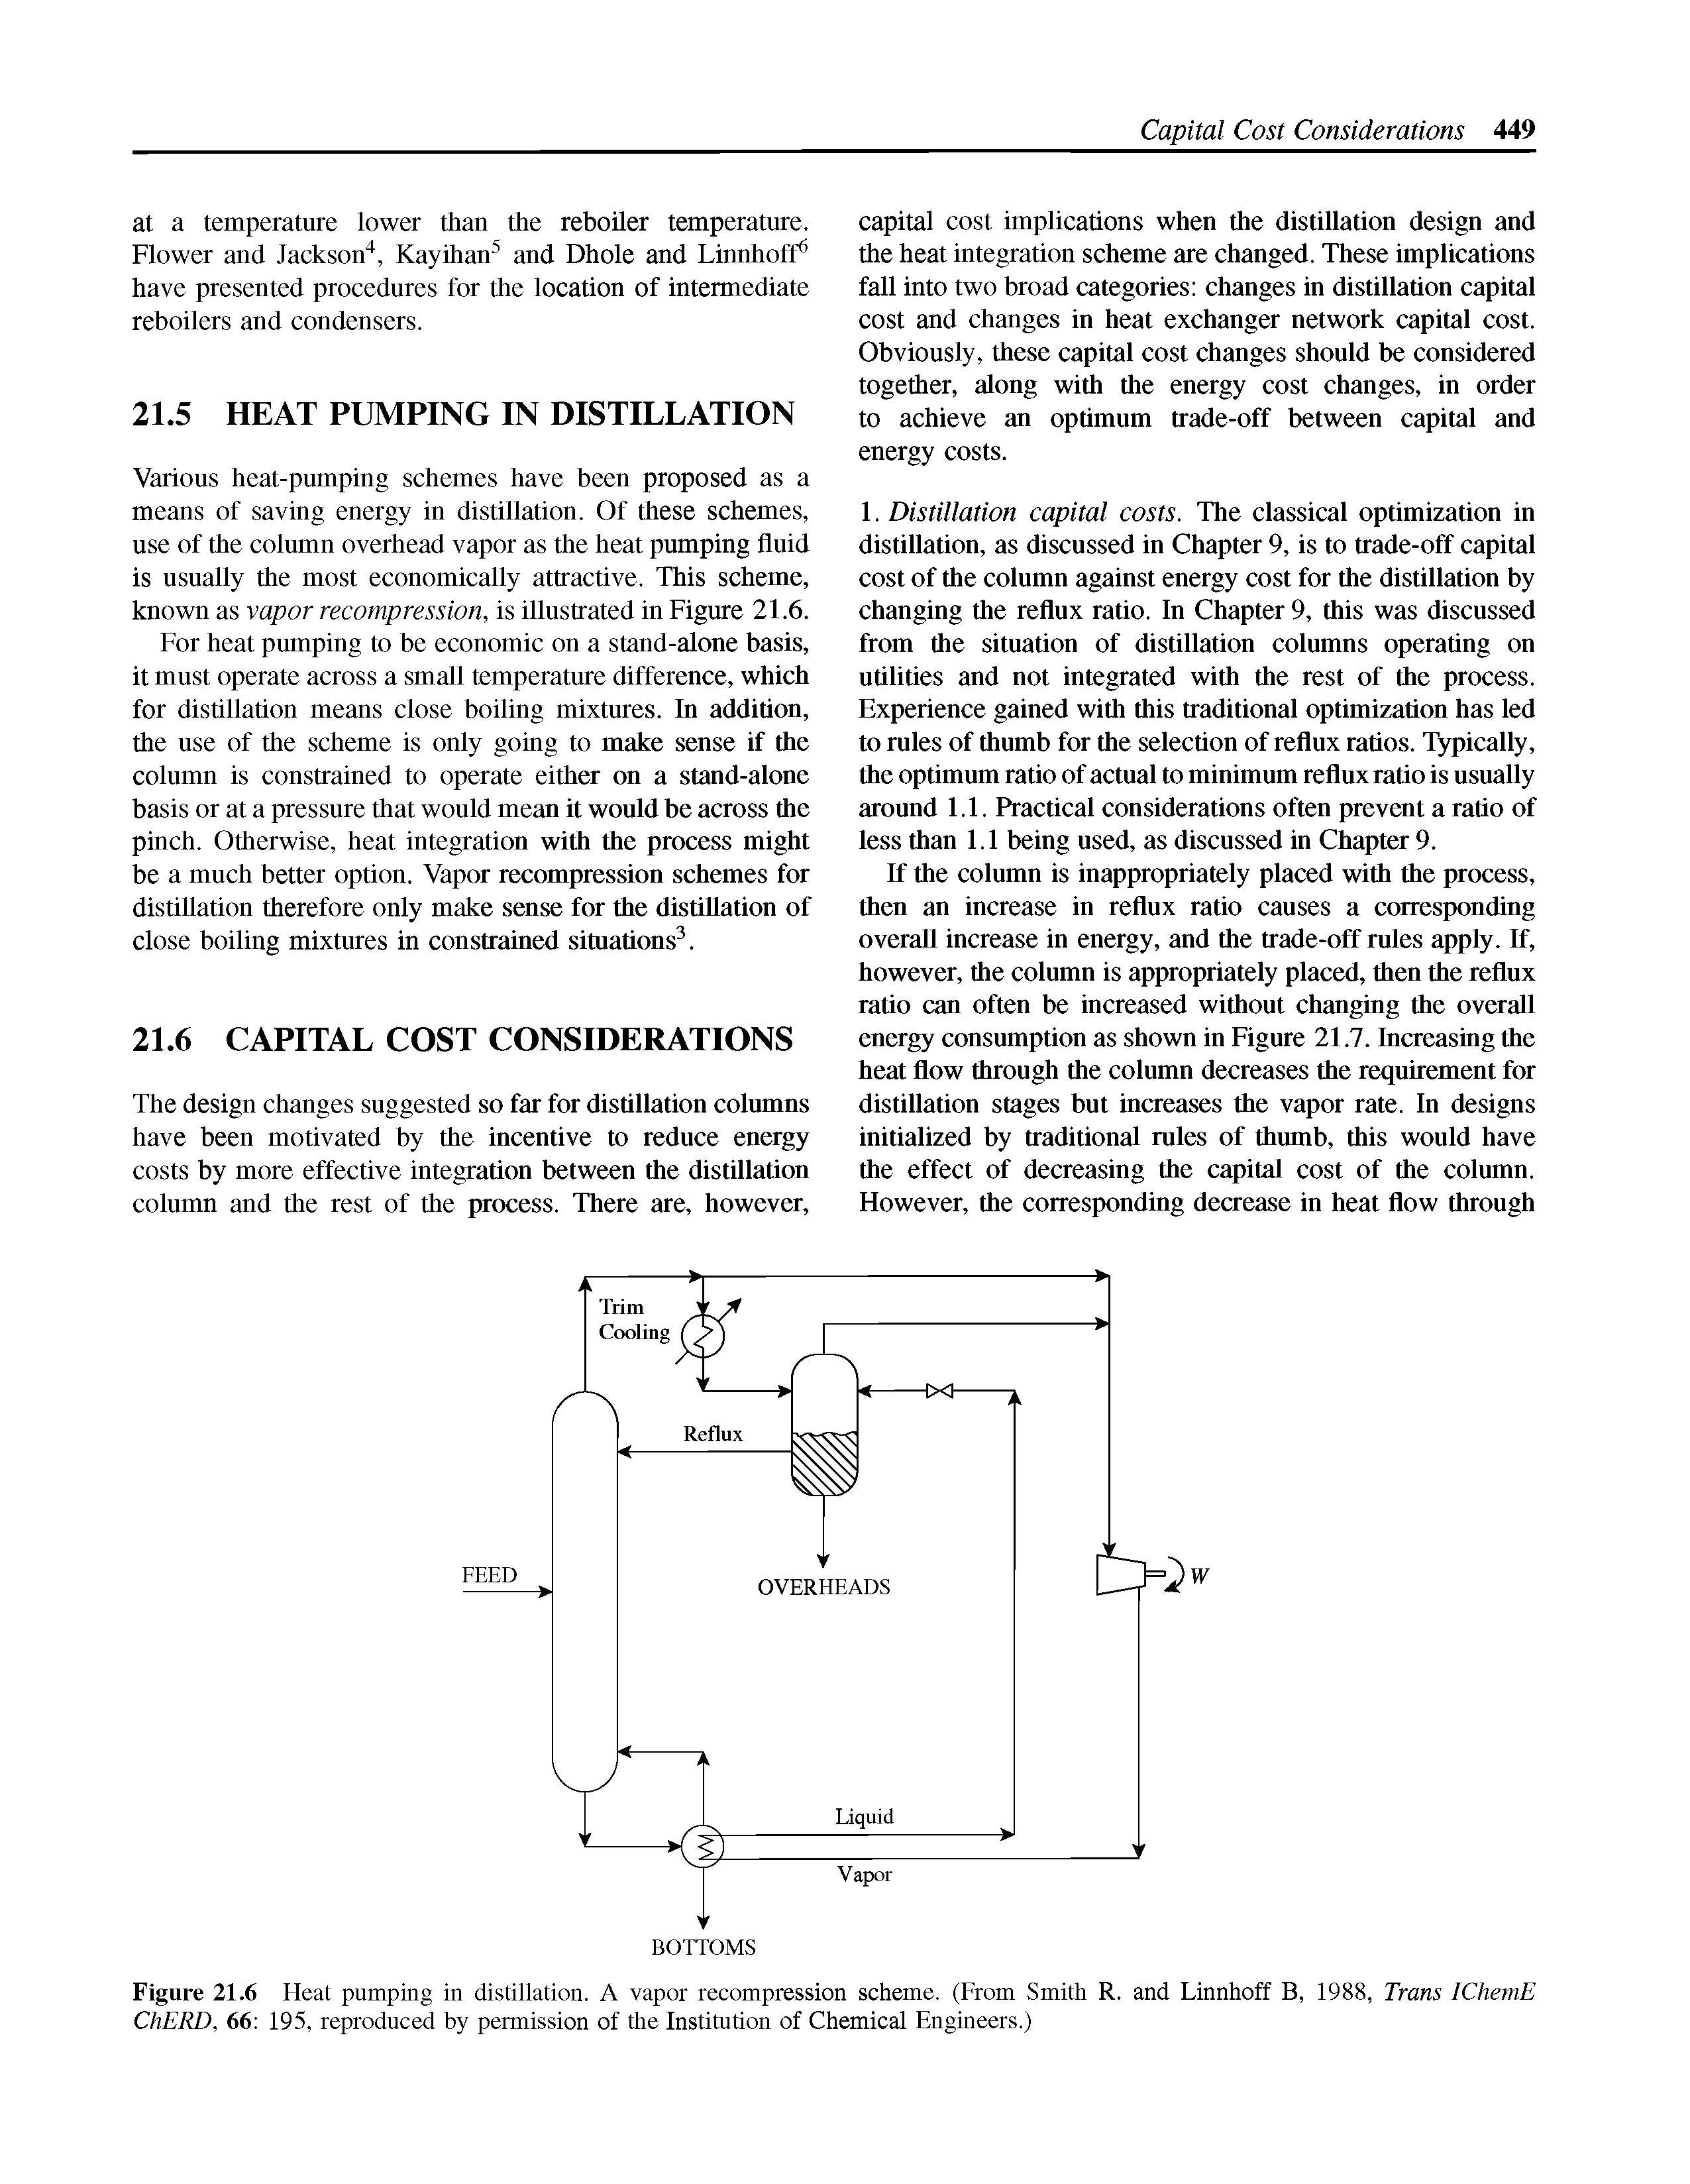 Figure 21.6 Heat pumping in distillation. A vapor recompression scheme. (From Smith R. and Linnhoff B, 1988, Trans IChemE ChERD, 66 195, reproduced by permission of the Institution of Chemical Engineers.)...